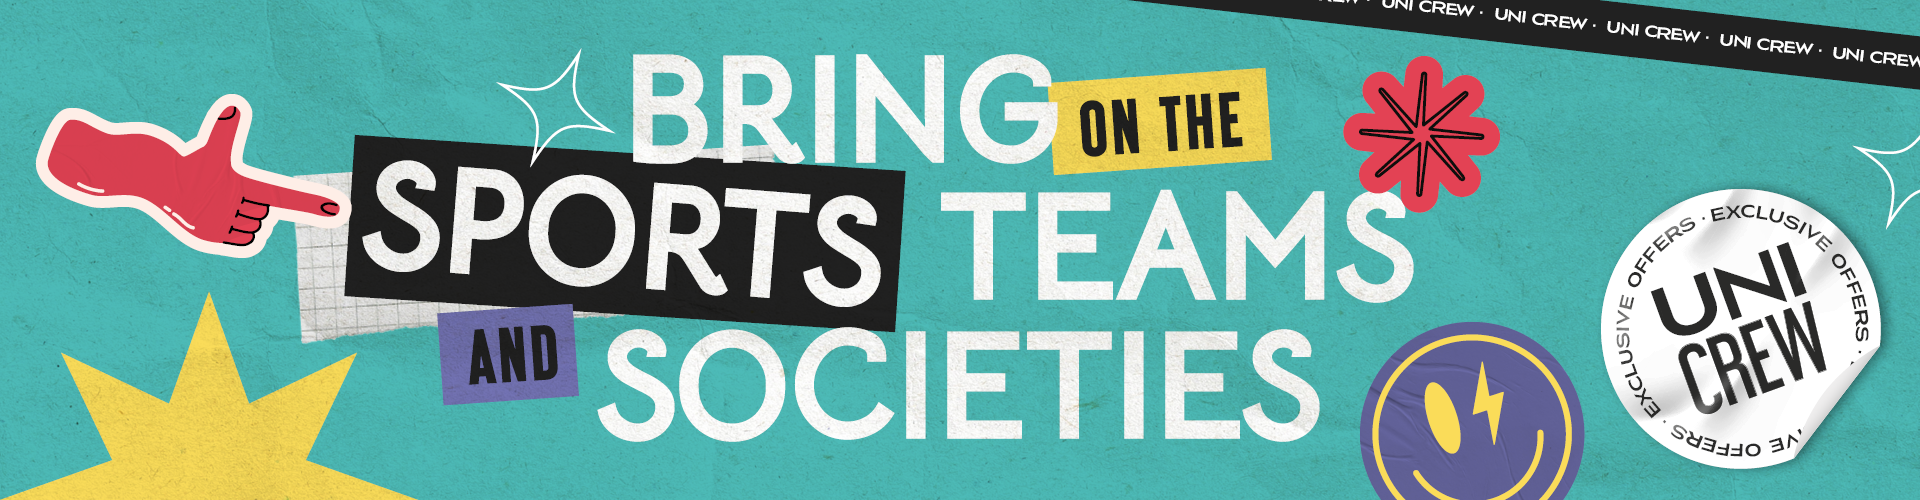 Bring on the Sports Teams and Societies | UniCrew Student Society Sponsorship